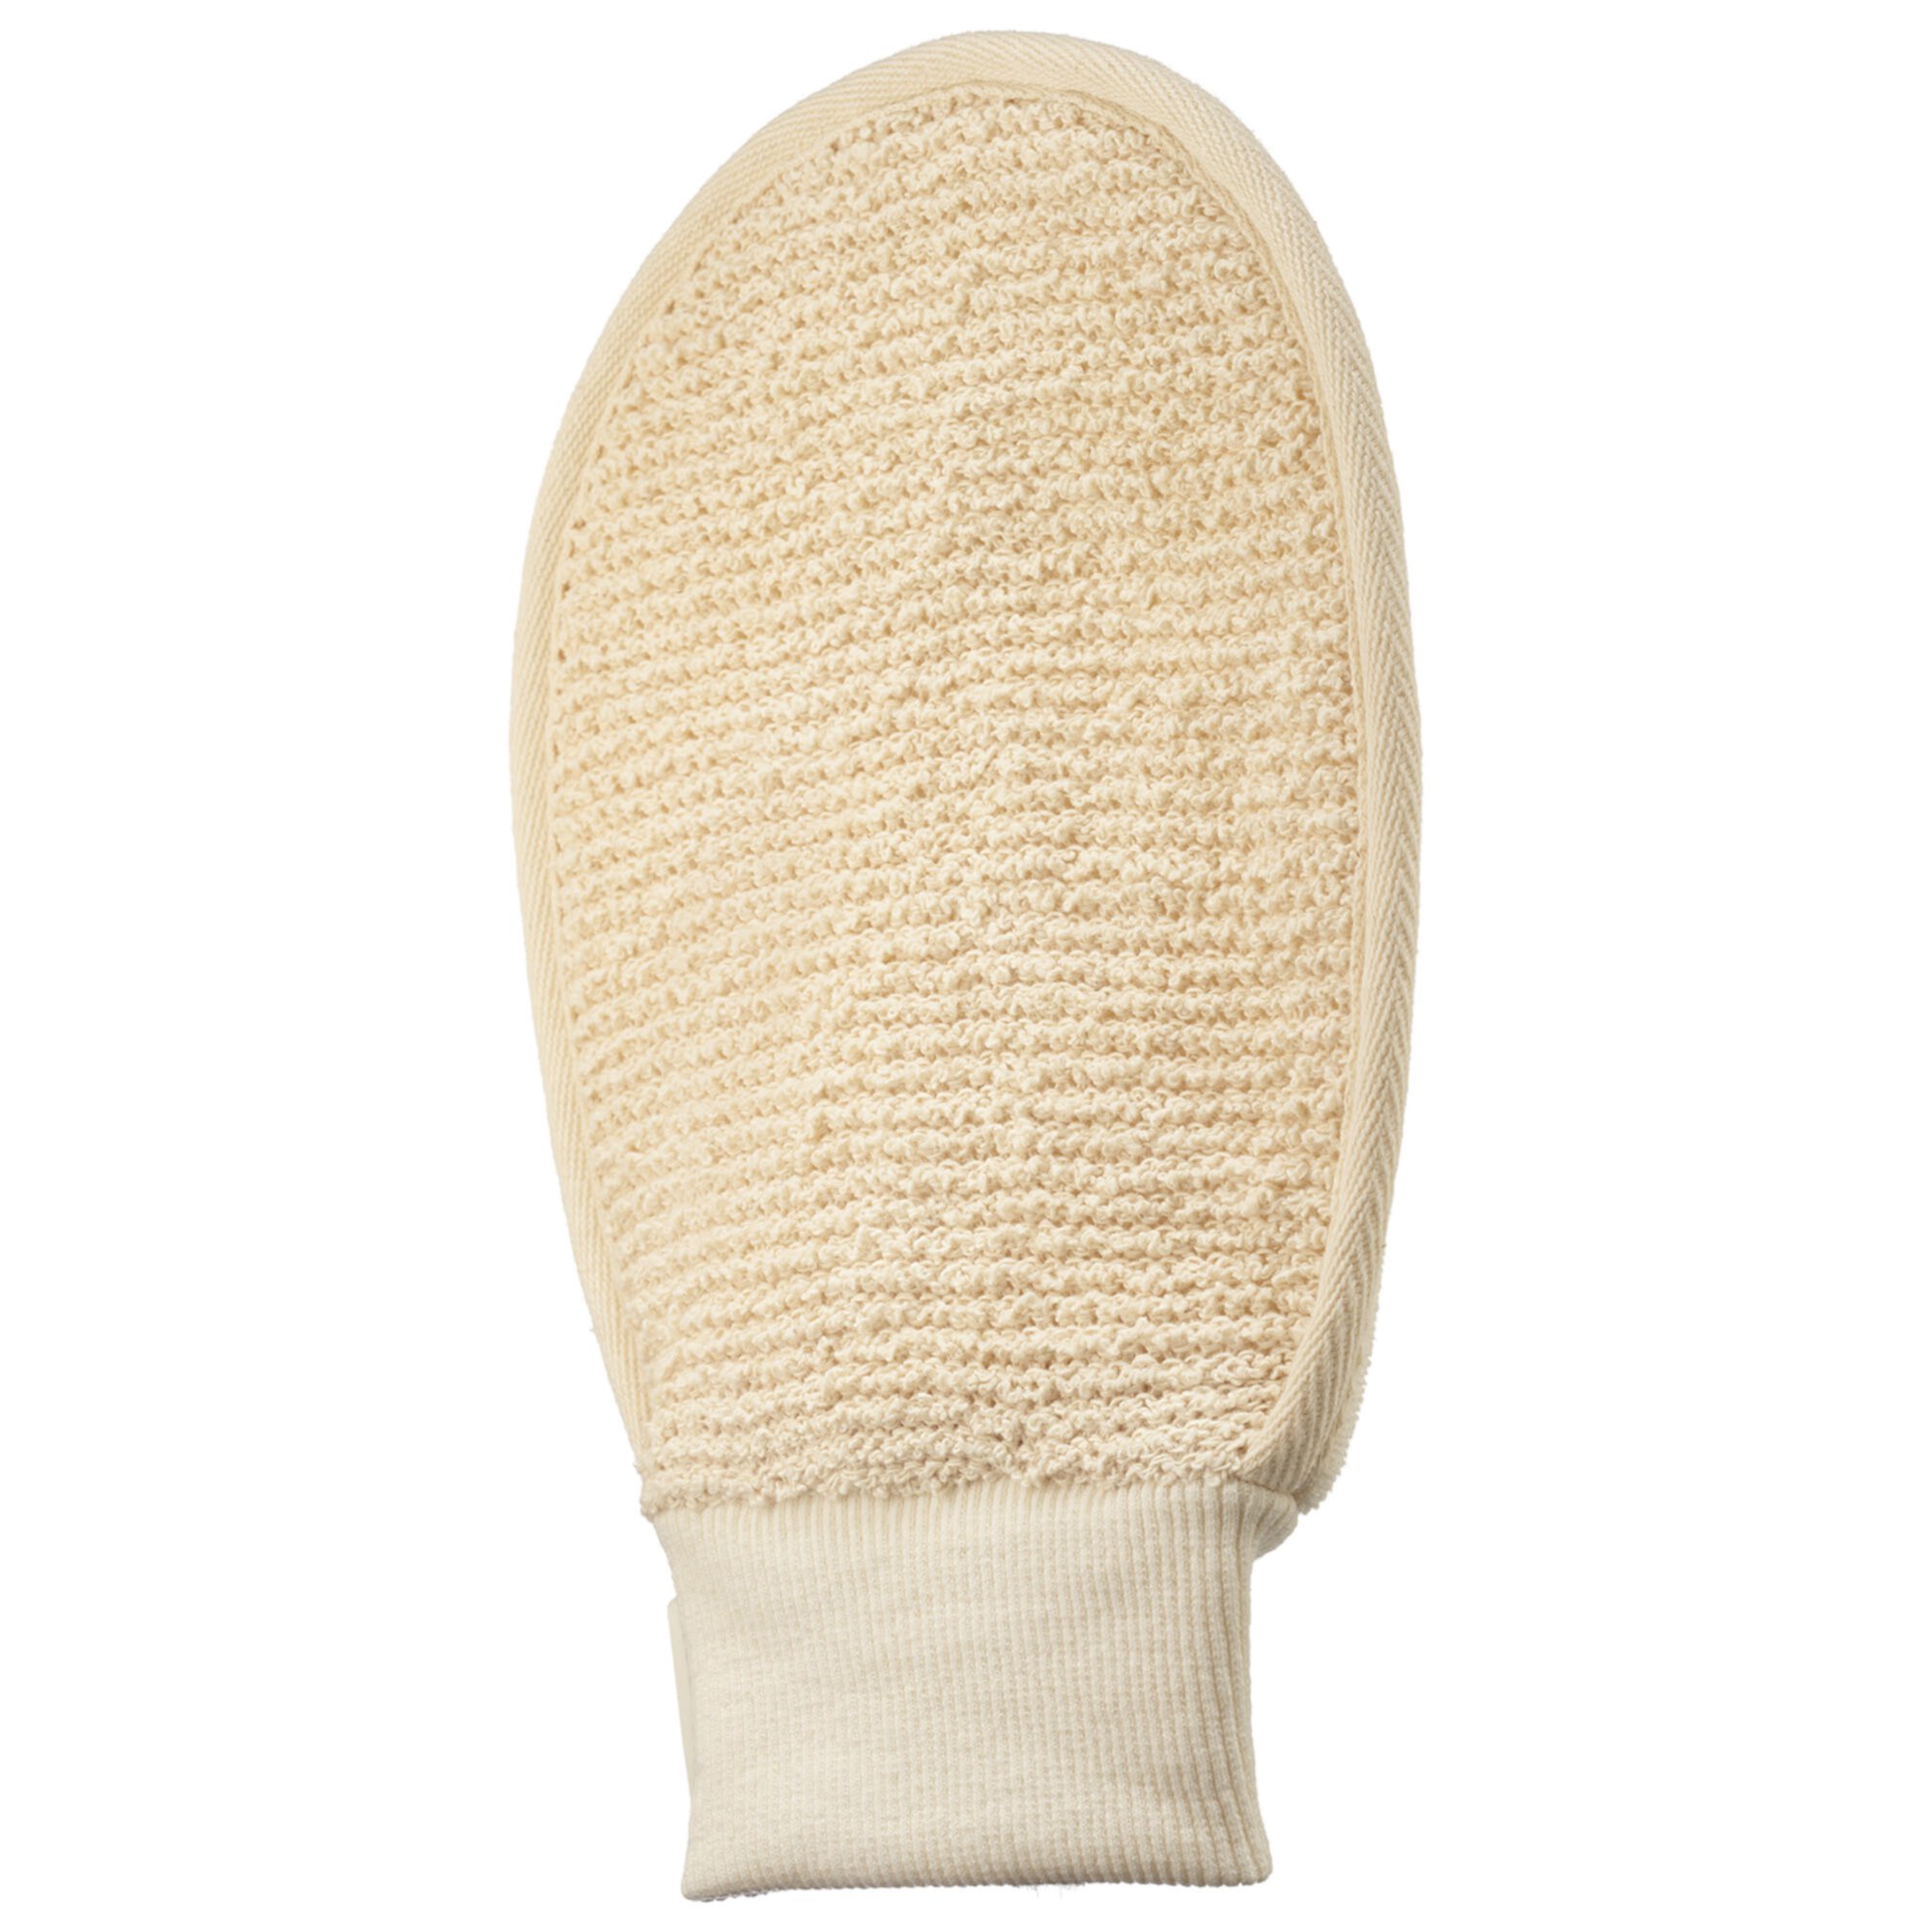 Exfoliate and Cleanse Bath Mitt SEPHORA COLLECTION